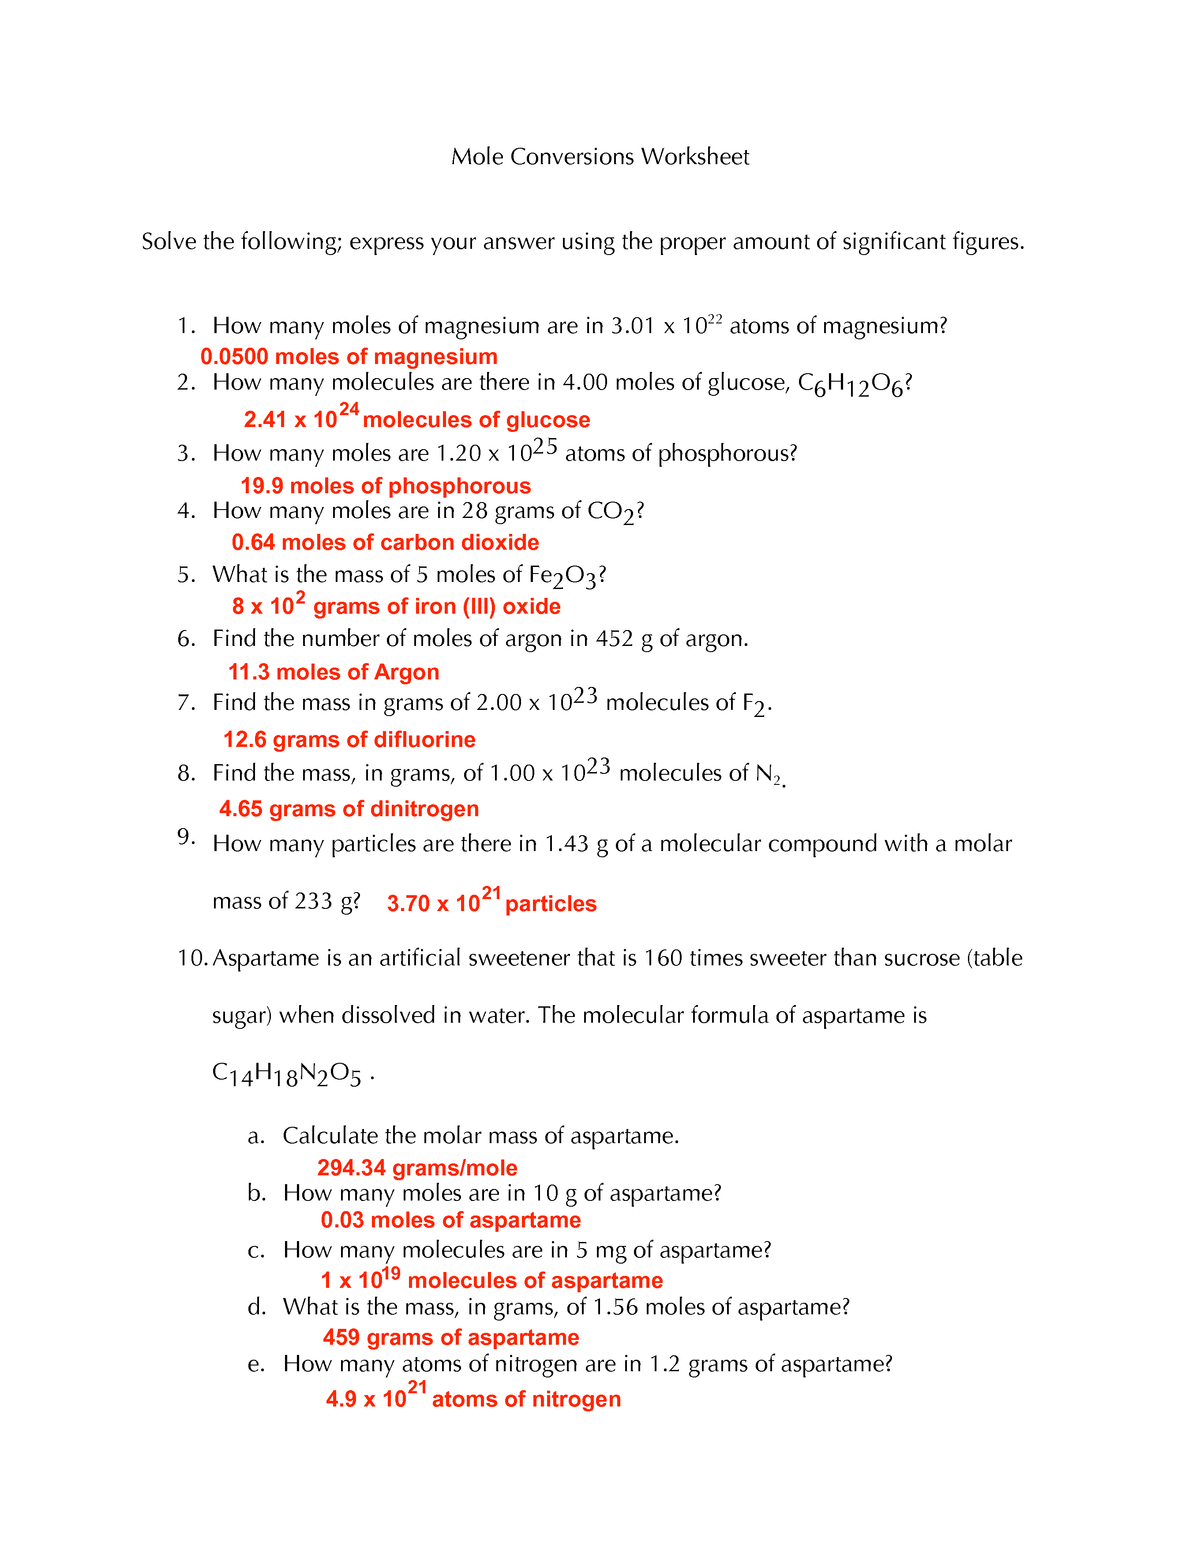  Mole Conversion Worksheet Answers Free Download Gambr co